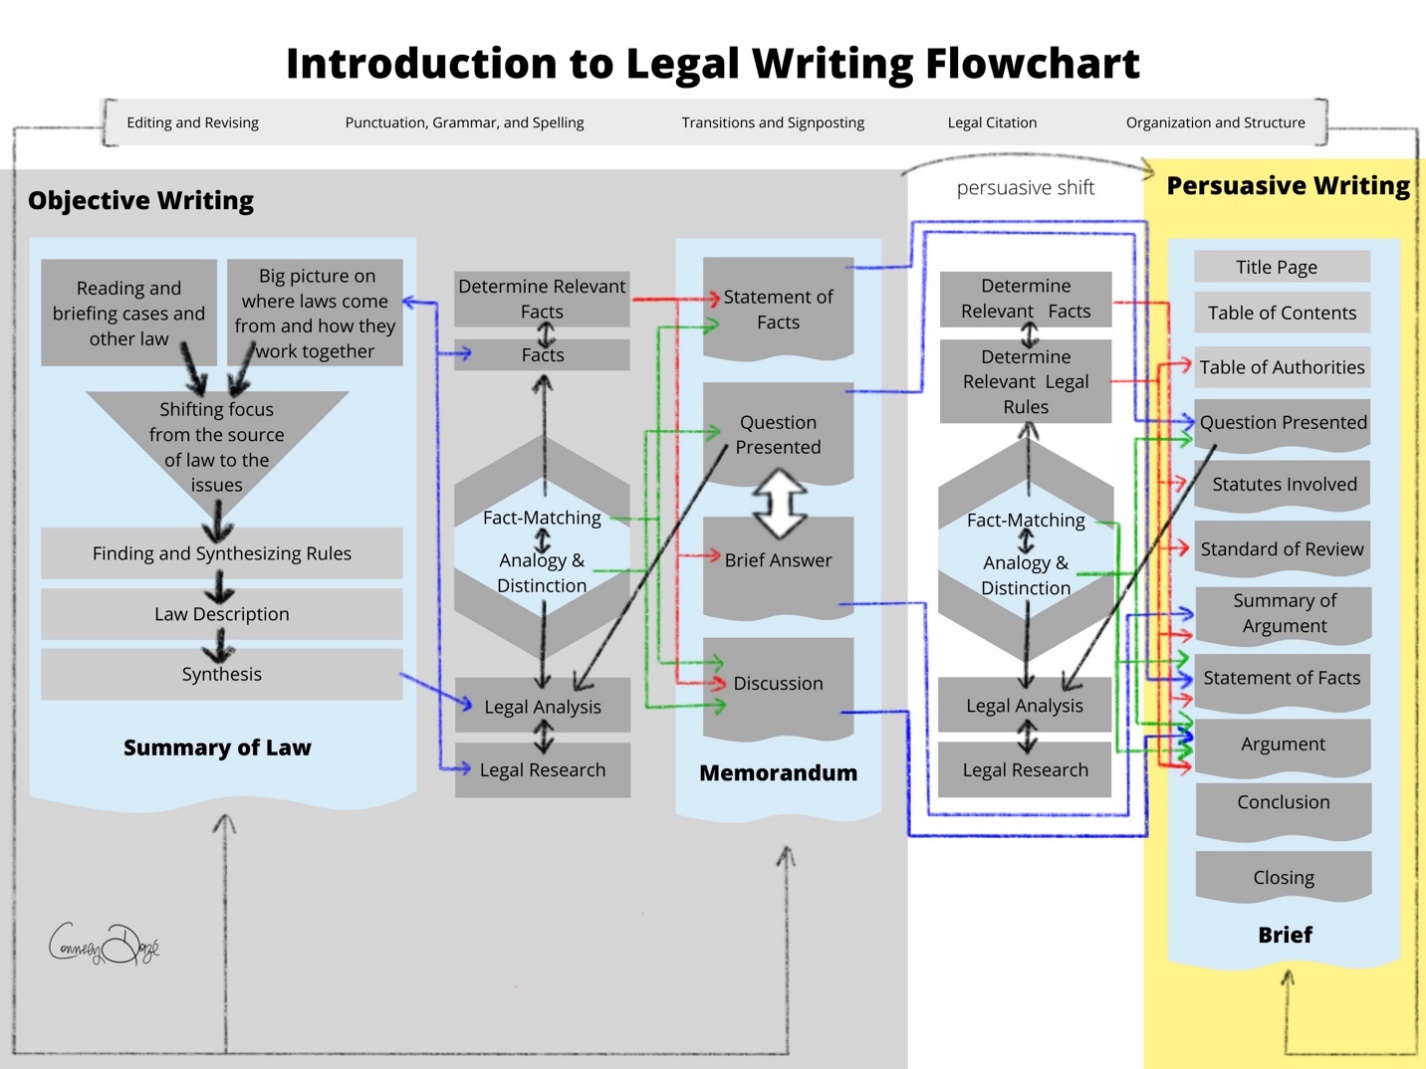 Flowchart showing how the different concepts being learned in legal writing tie together